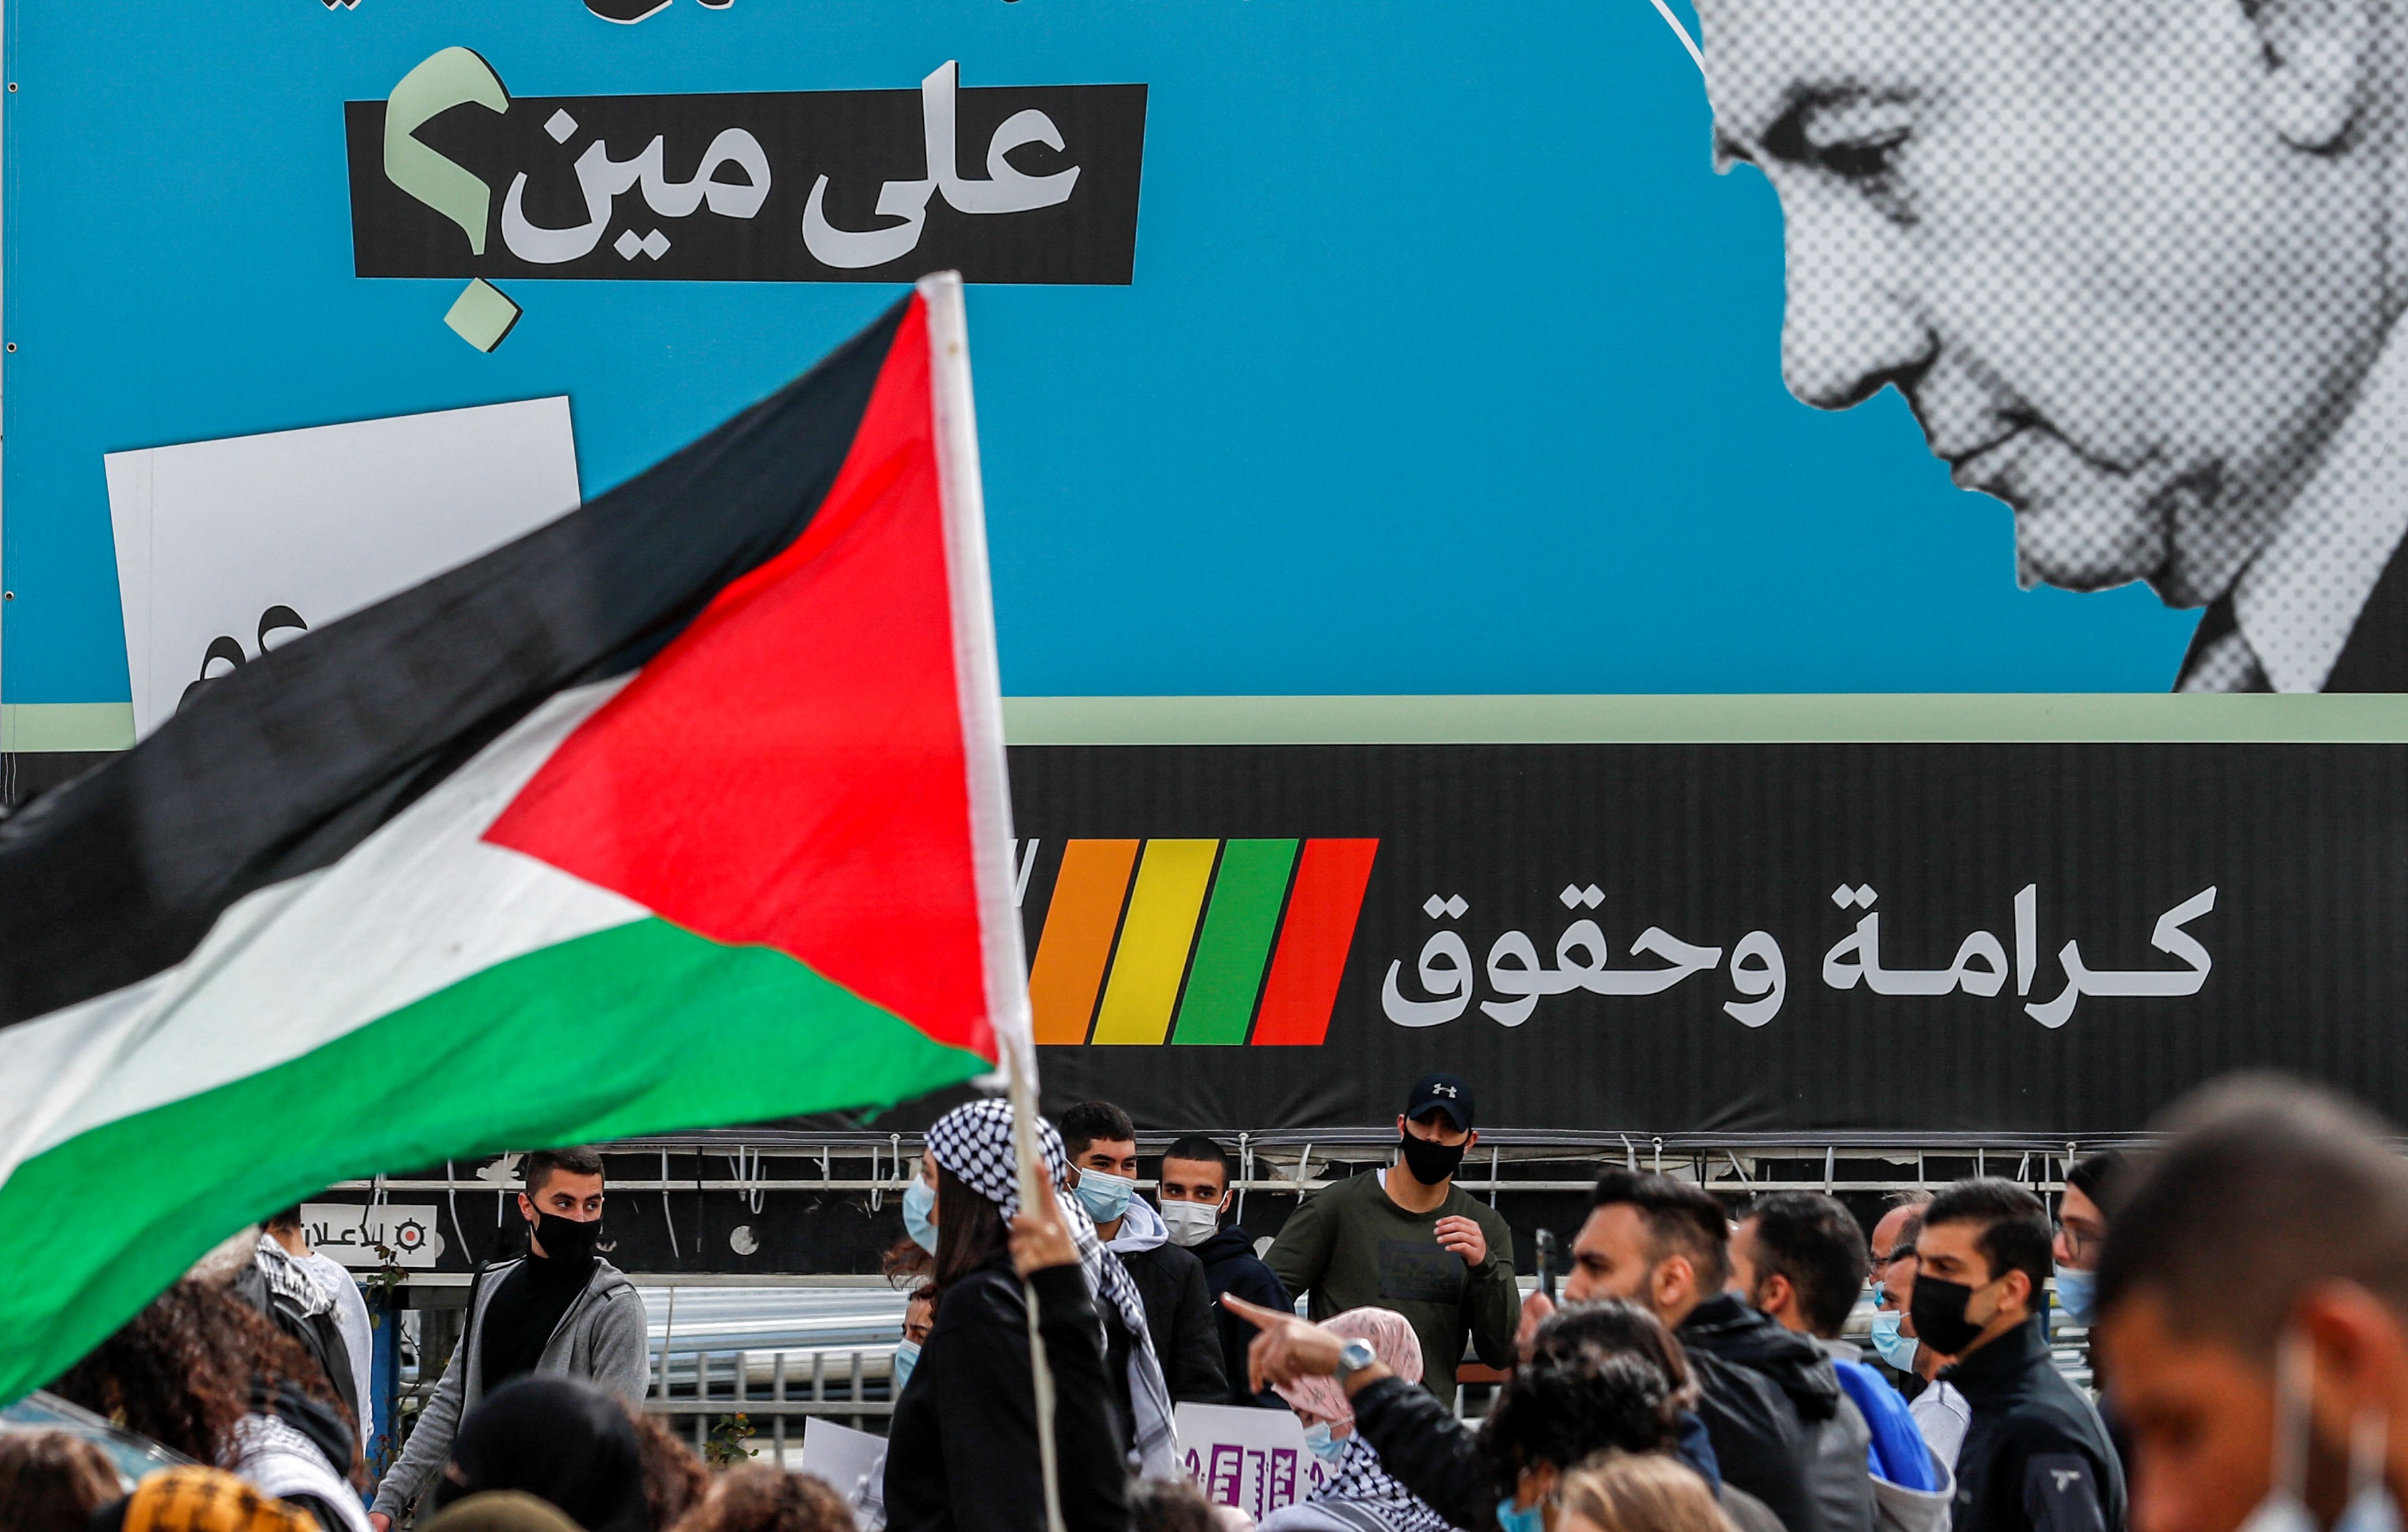 A demonstrator holds a Palestinian flag near an electoral billboard by the predominantly Arab Israeli electoral alliance the Joint List depicting Israeli prime minister Benjamin Netanyahu with a caption reading in Arabic "whom is he fooling?" during a demonstration